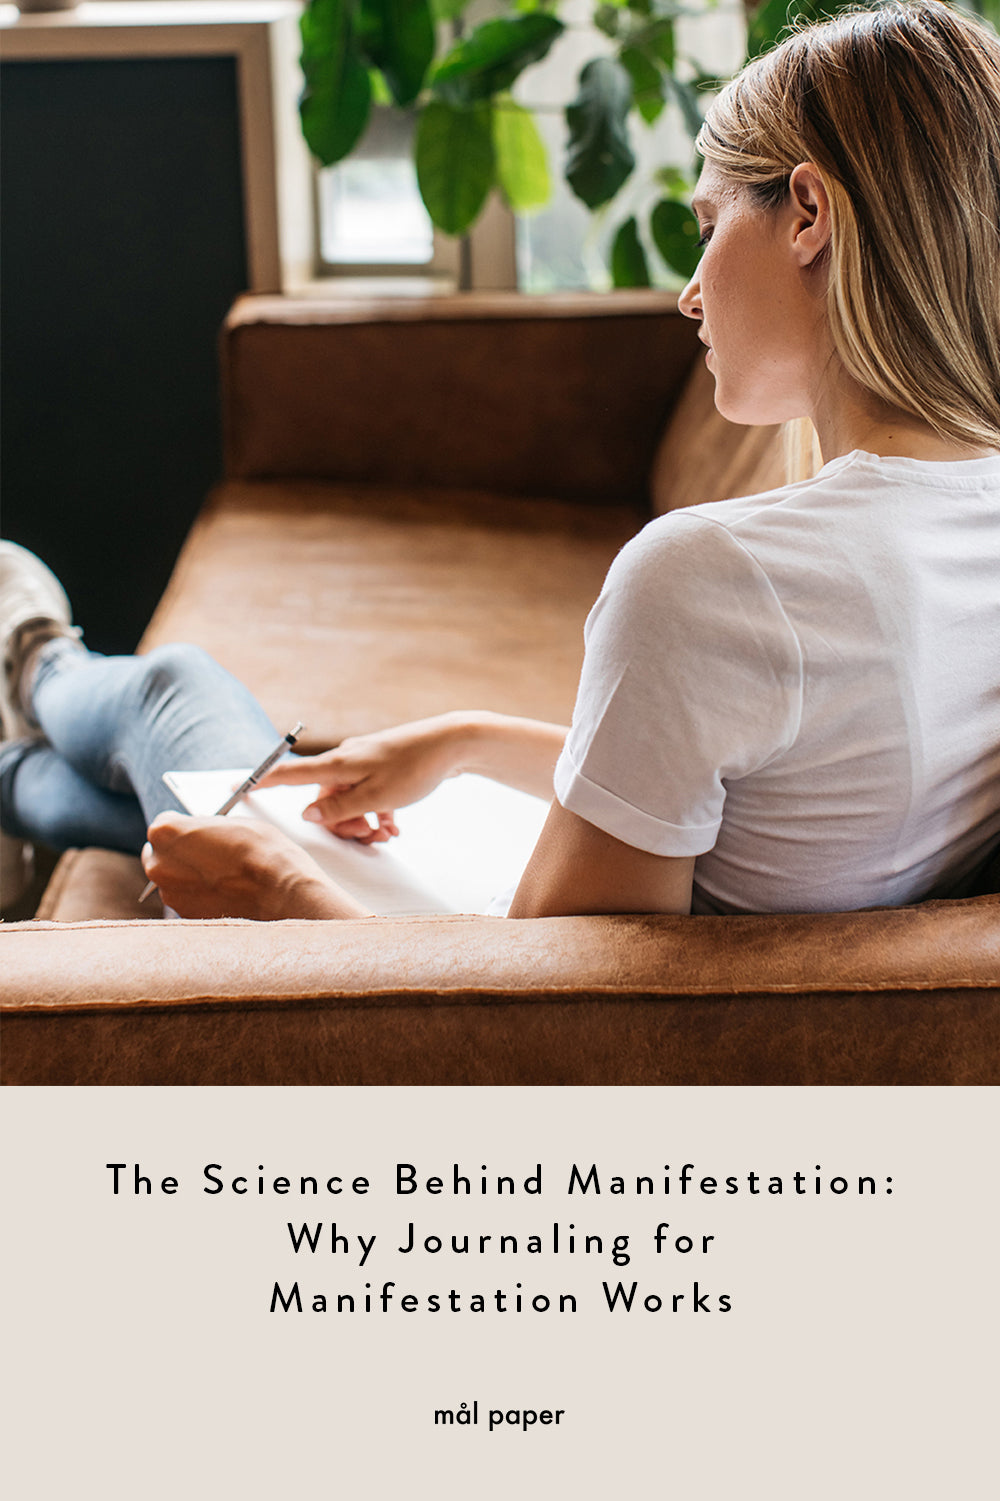 The Science Behind Manifestation: Why Journaling for Manifestation Works